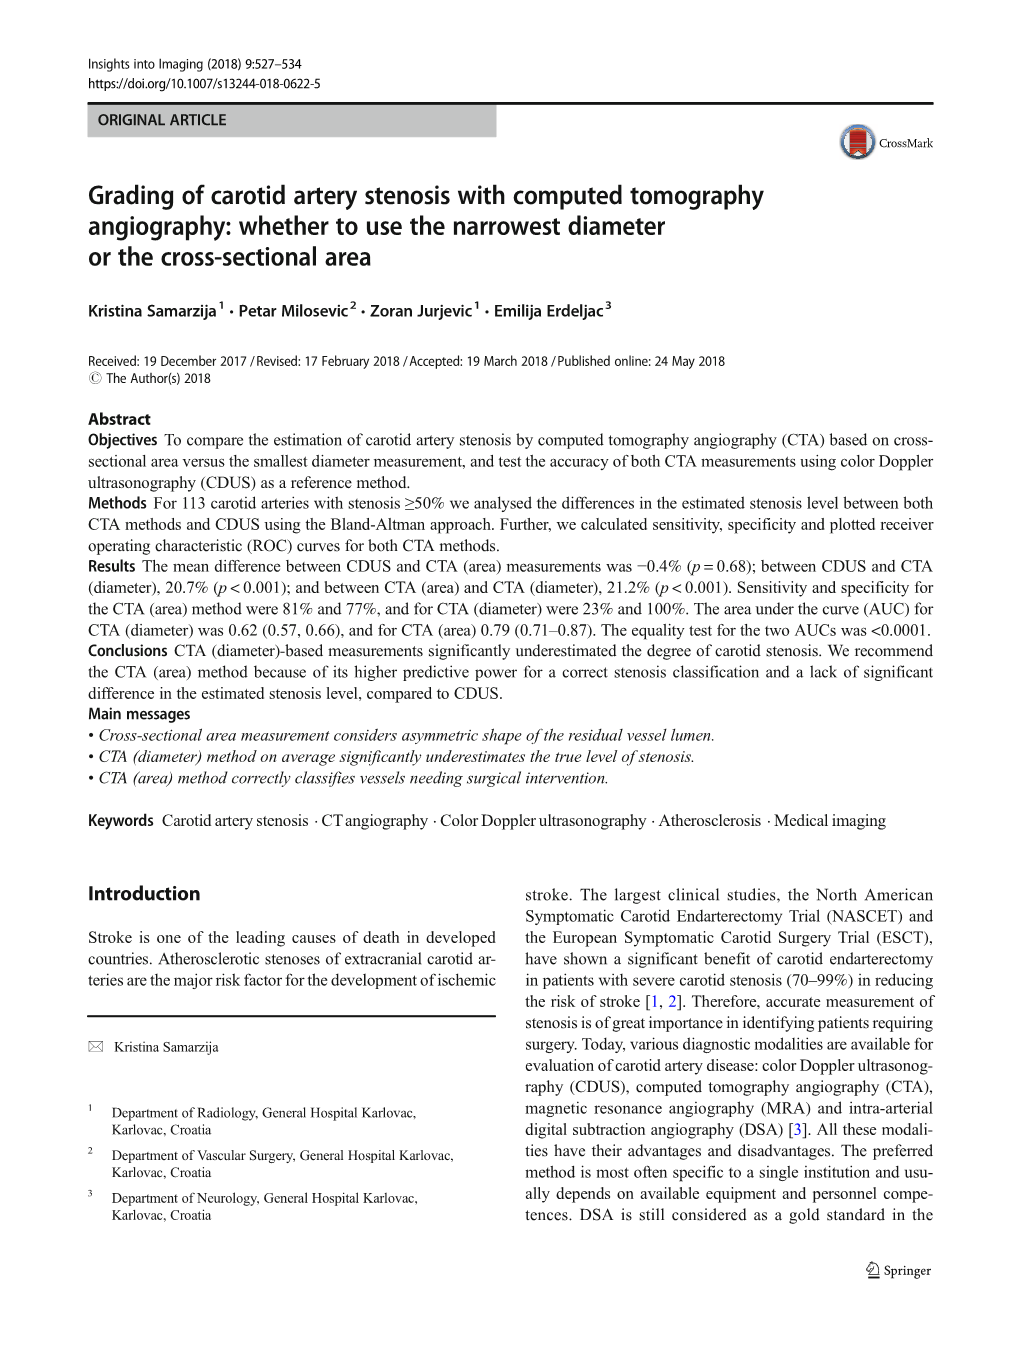 Grading of Carotid Artery Stenosis with Computed Tomography Angiography: Whether to Use the Narrowest Diameter Or the Cross-Sectional Area